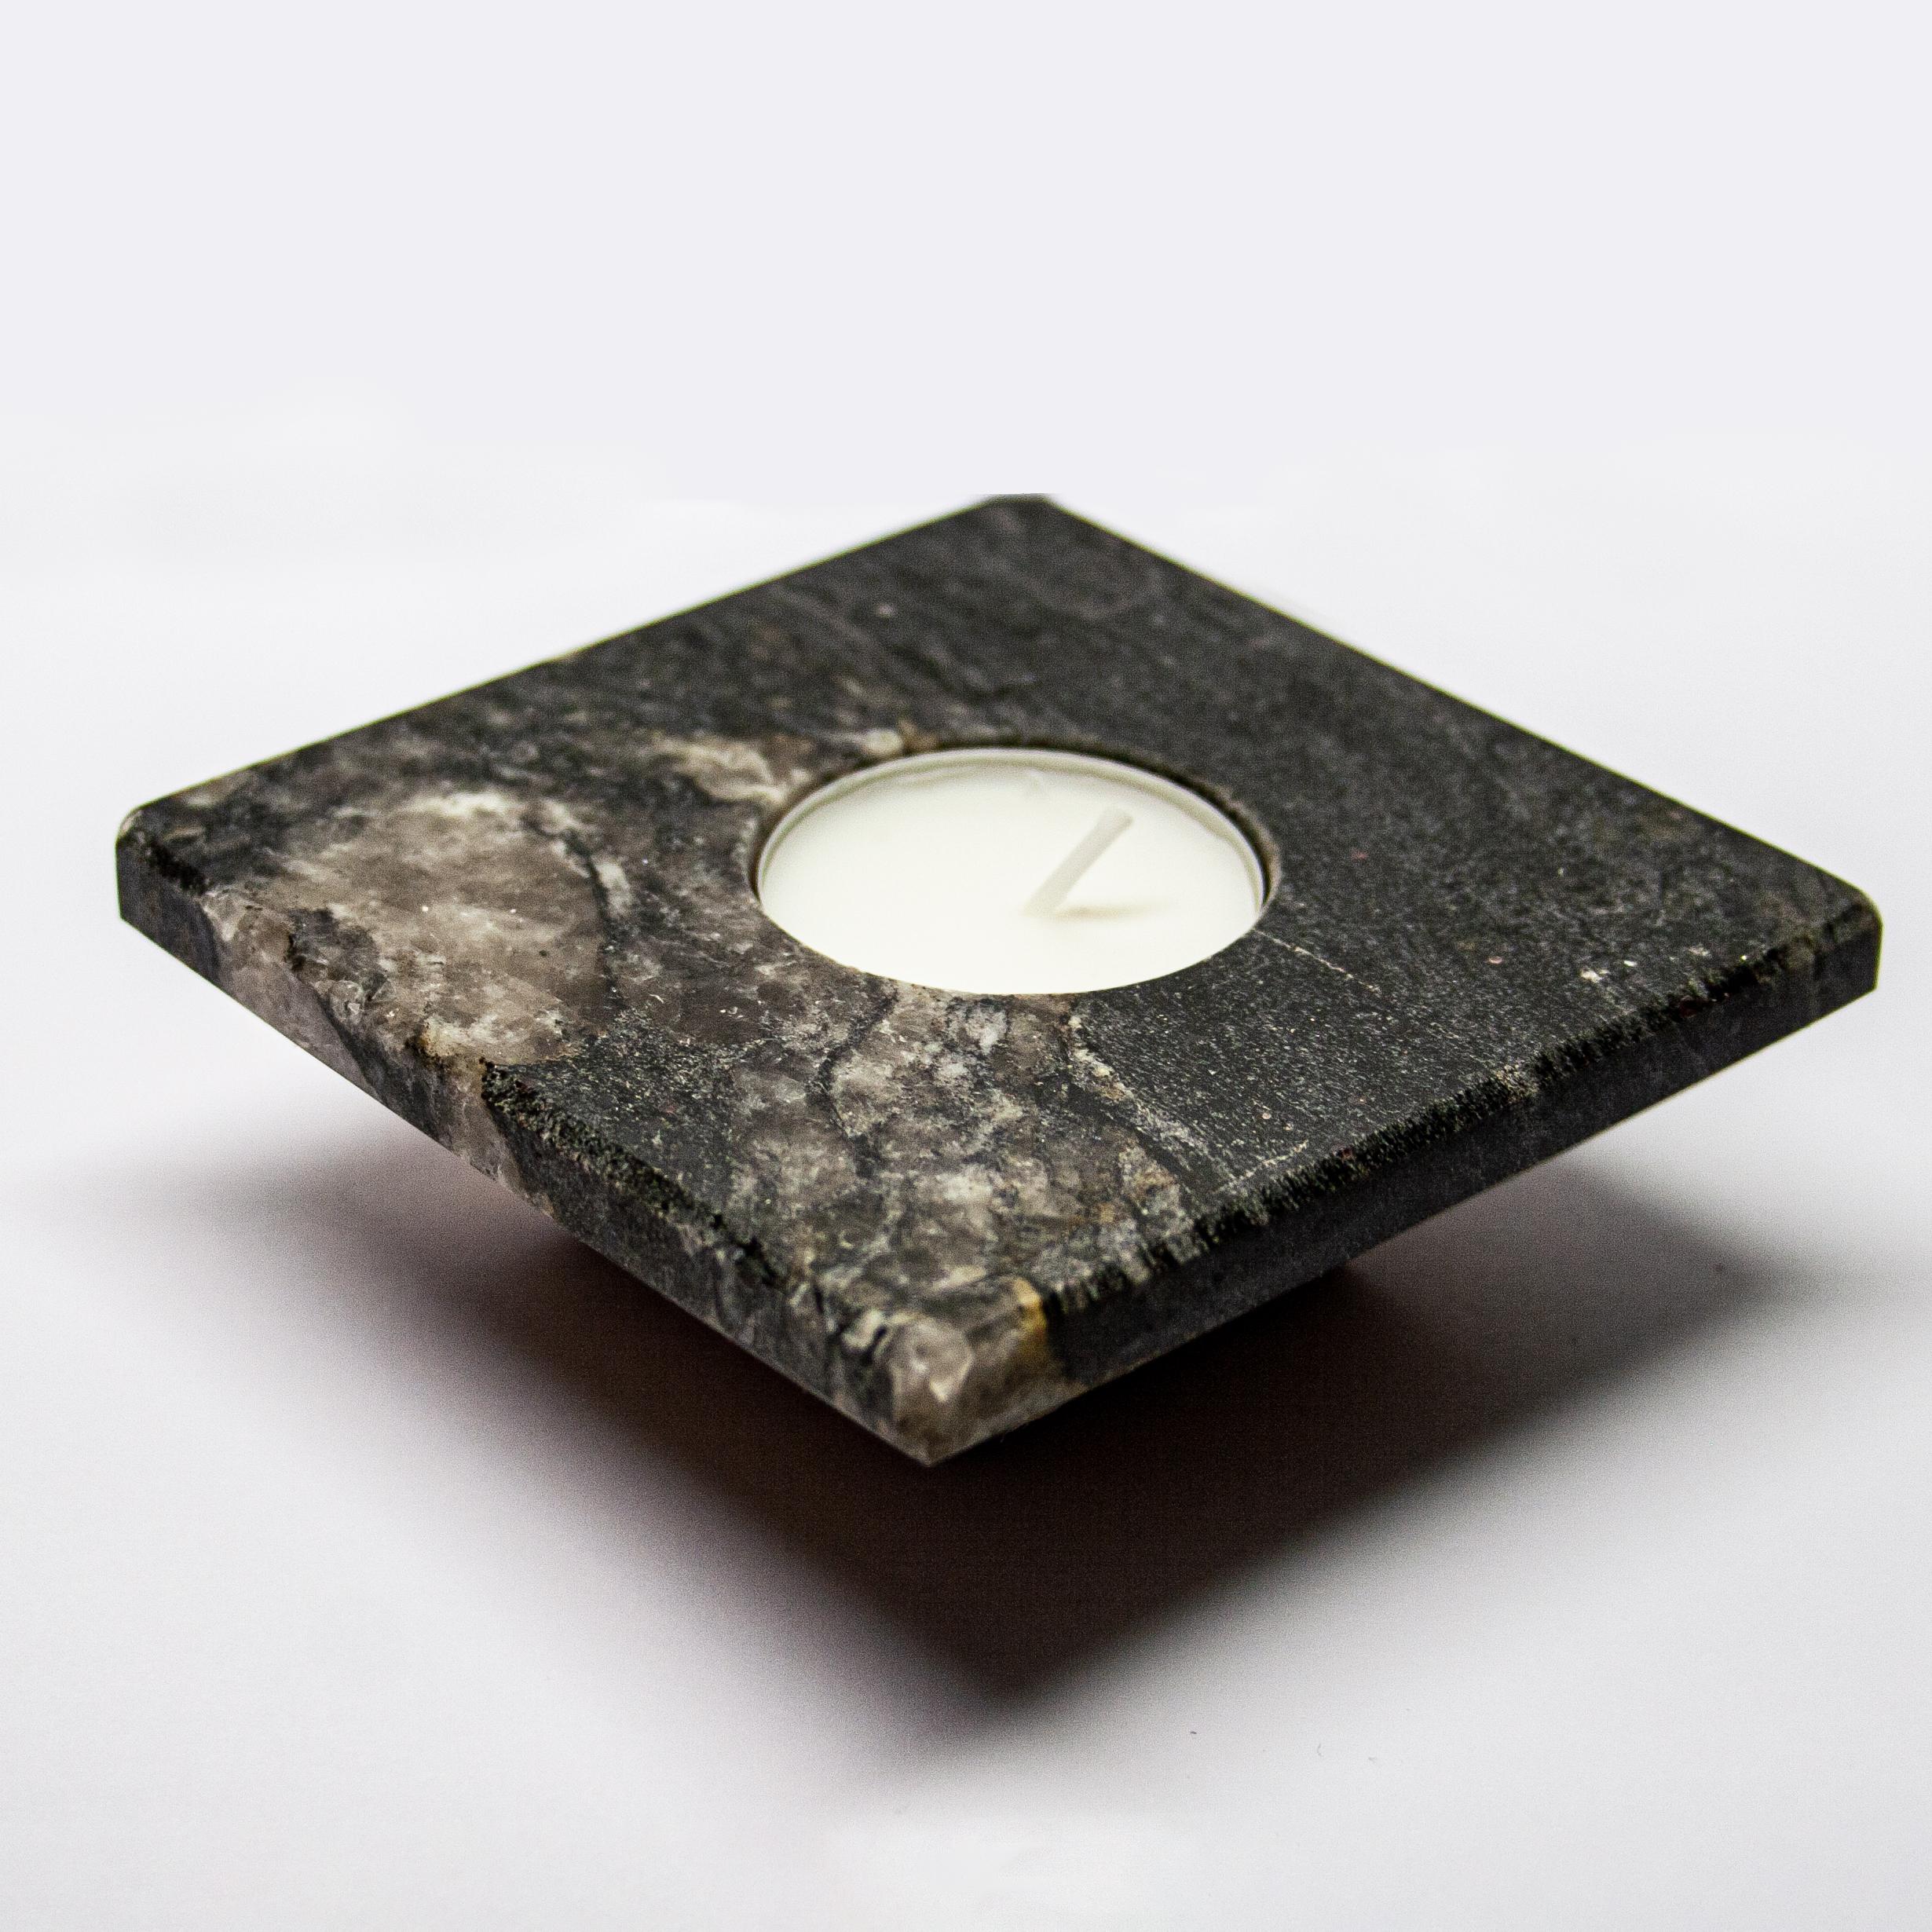 Polished Candle Holder Black Granite White Quartz Geode Inlay Unique Mother’s Day Gift For Sale